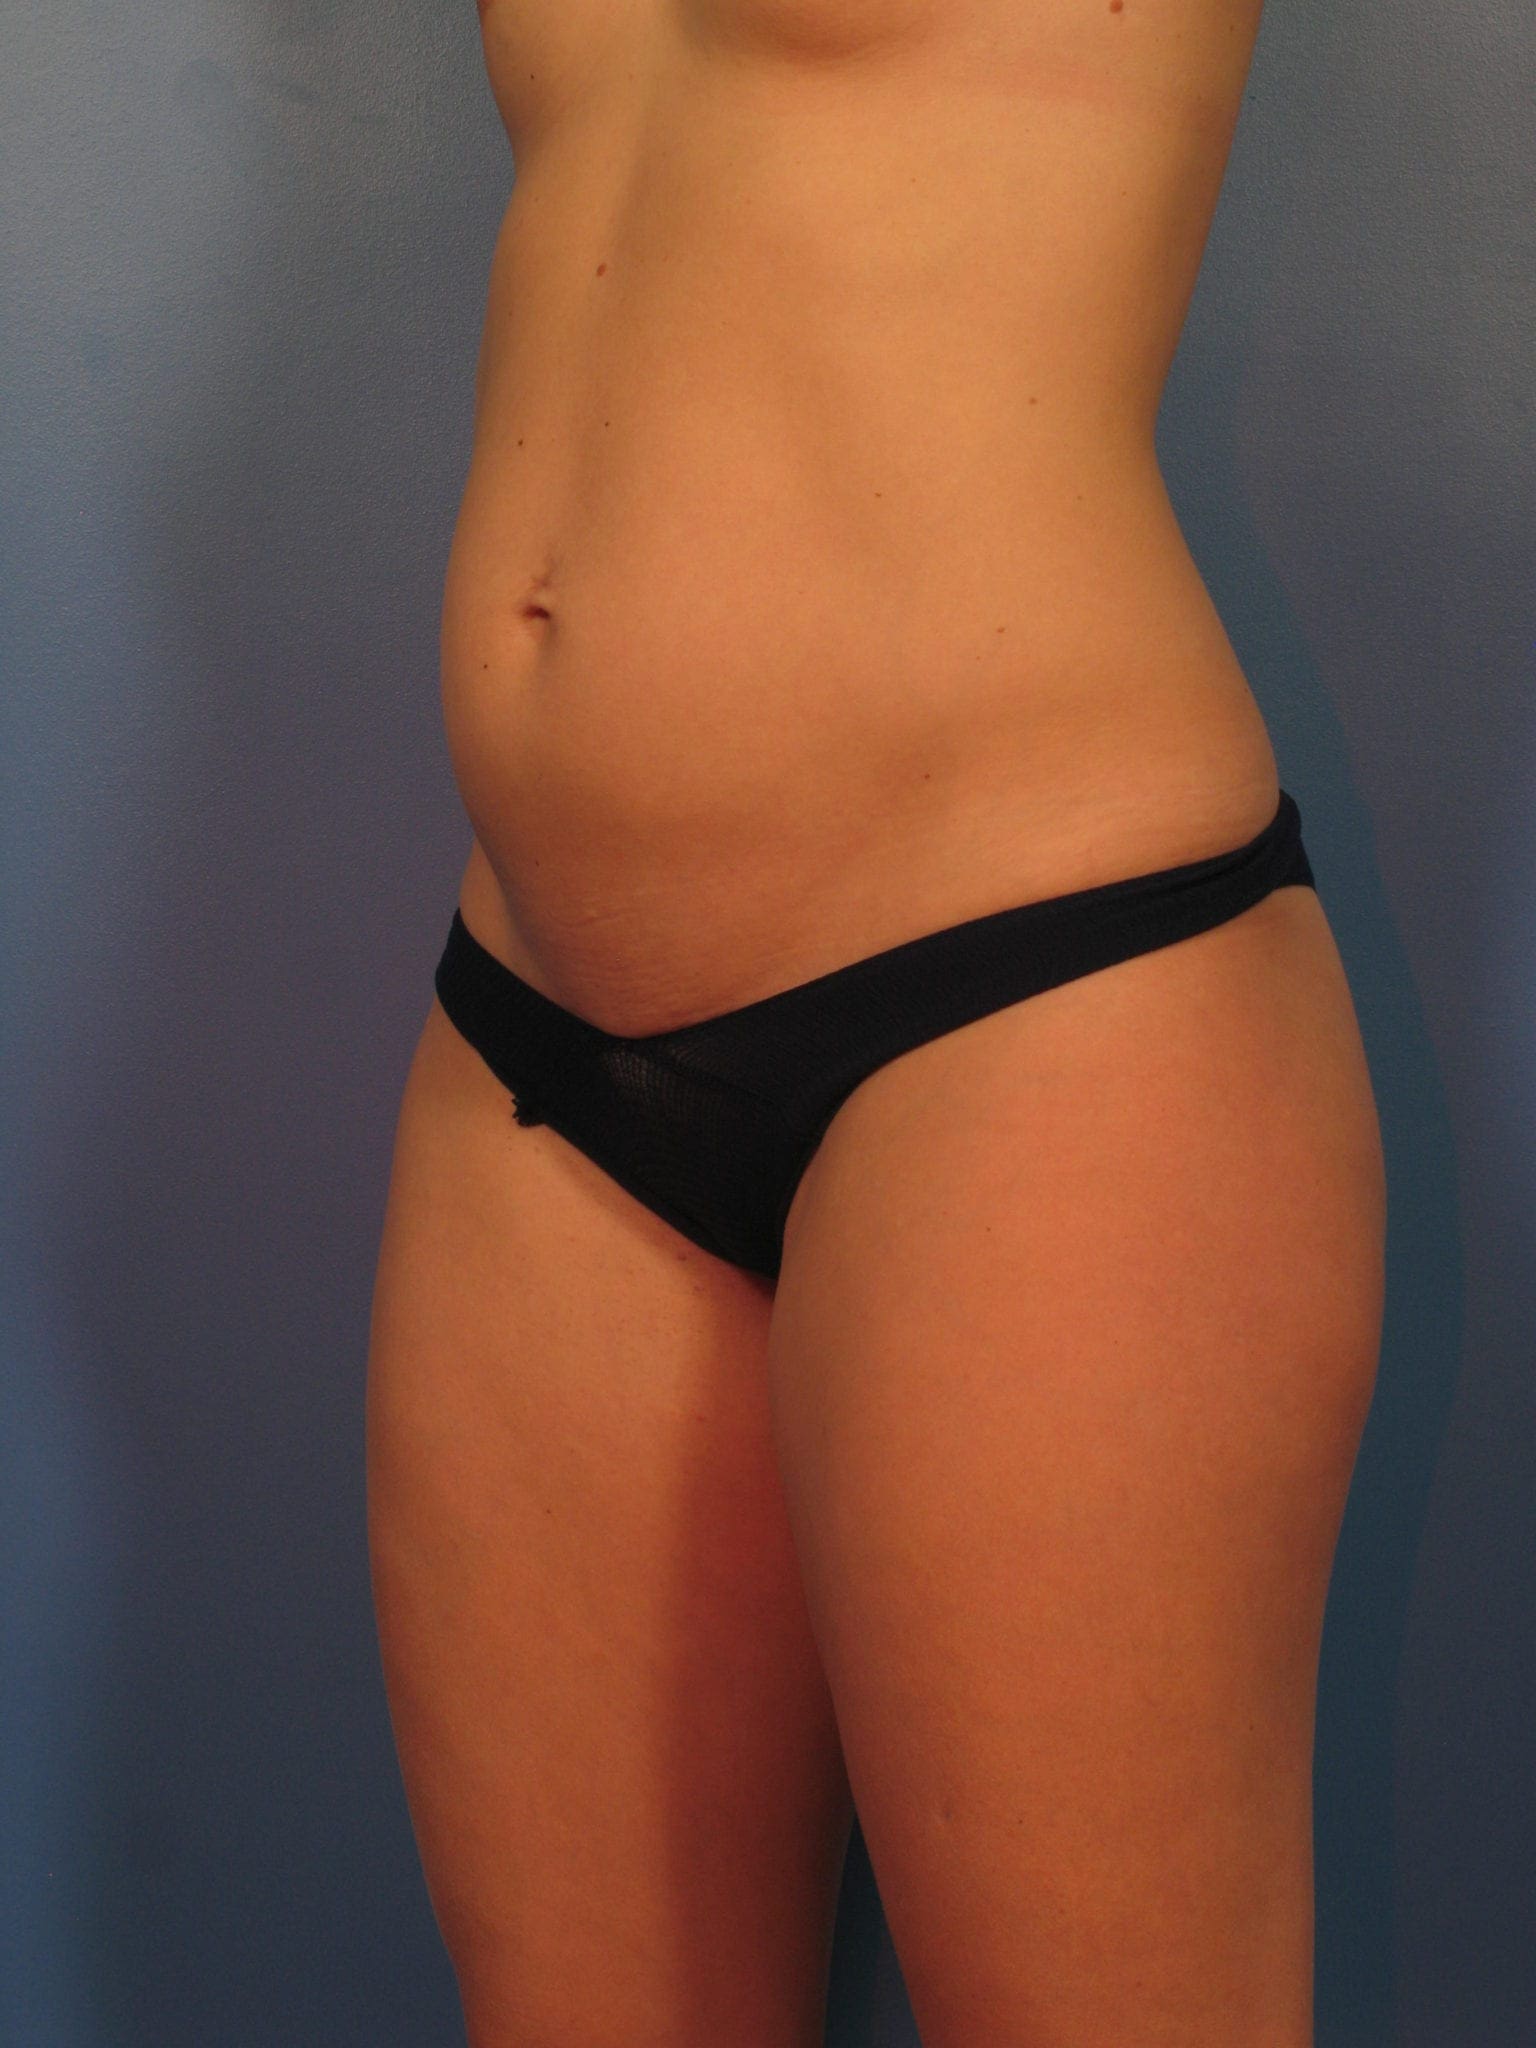 Liposuction - Case 422a - Before